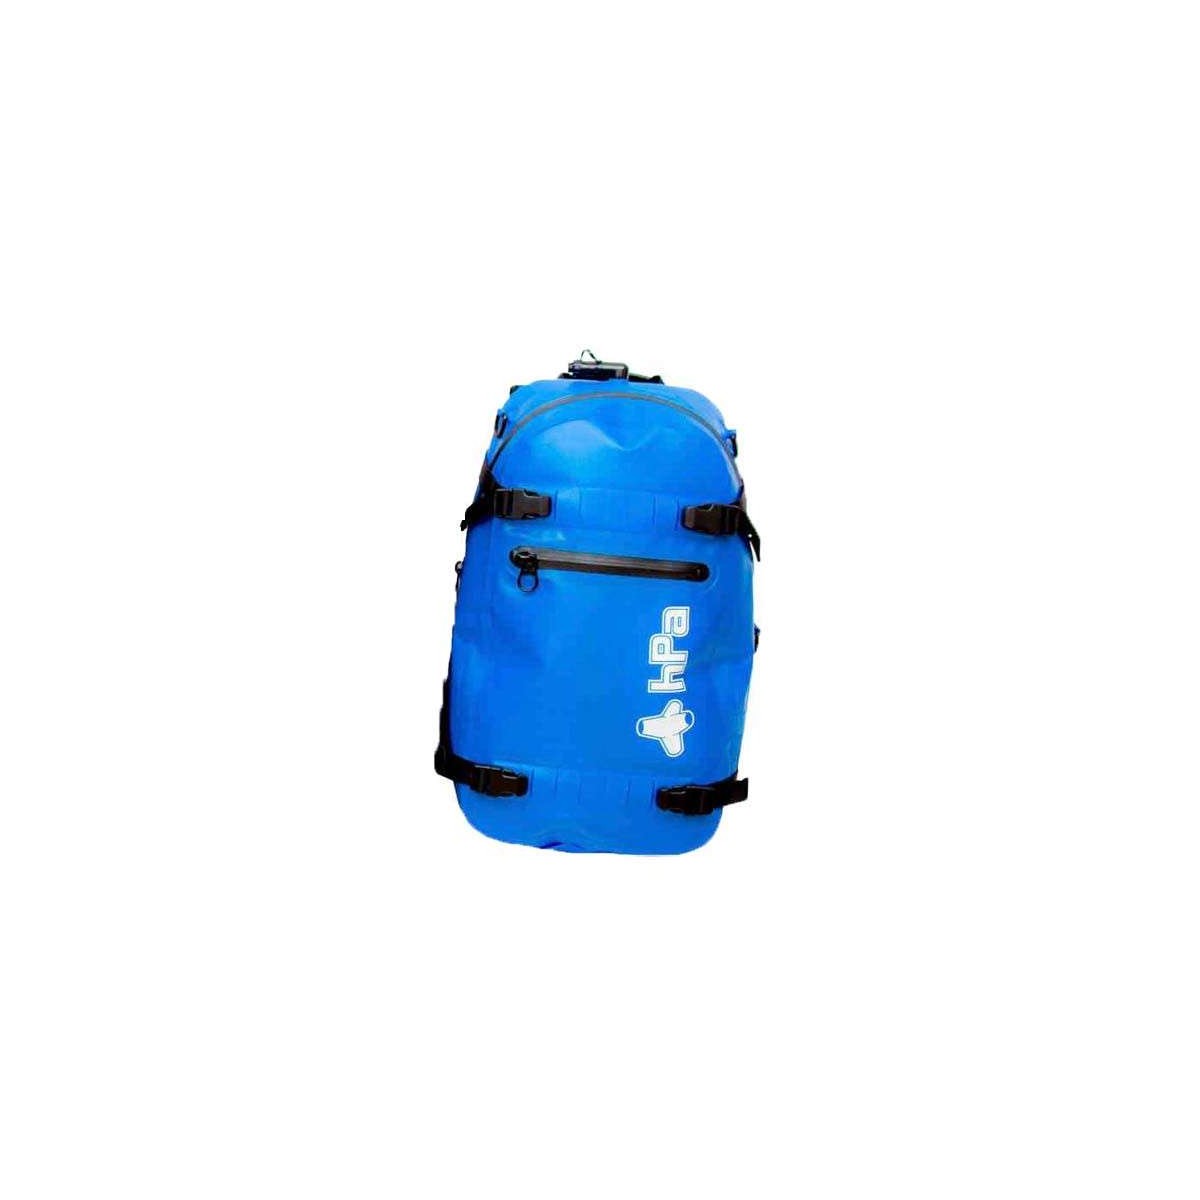 HPA Sac à dos étanche Backpack 40 HD - Bagagerie